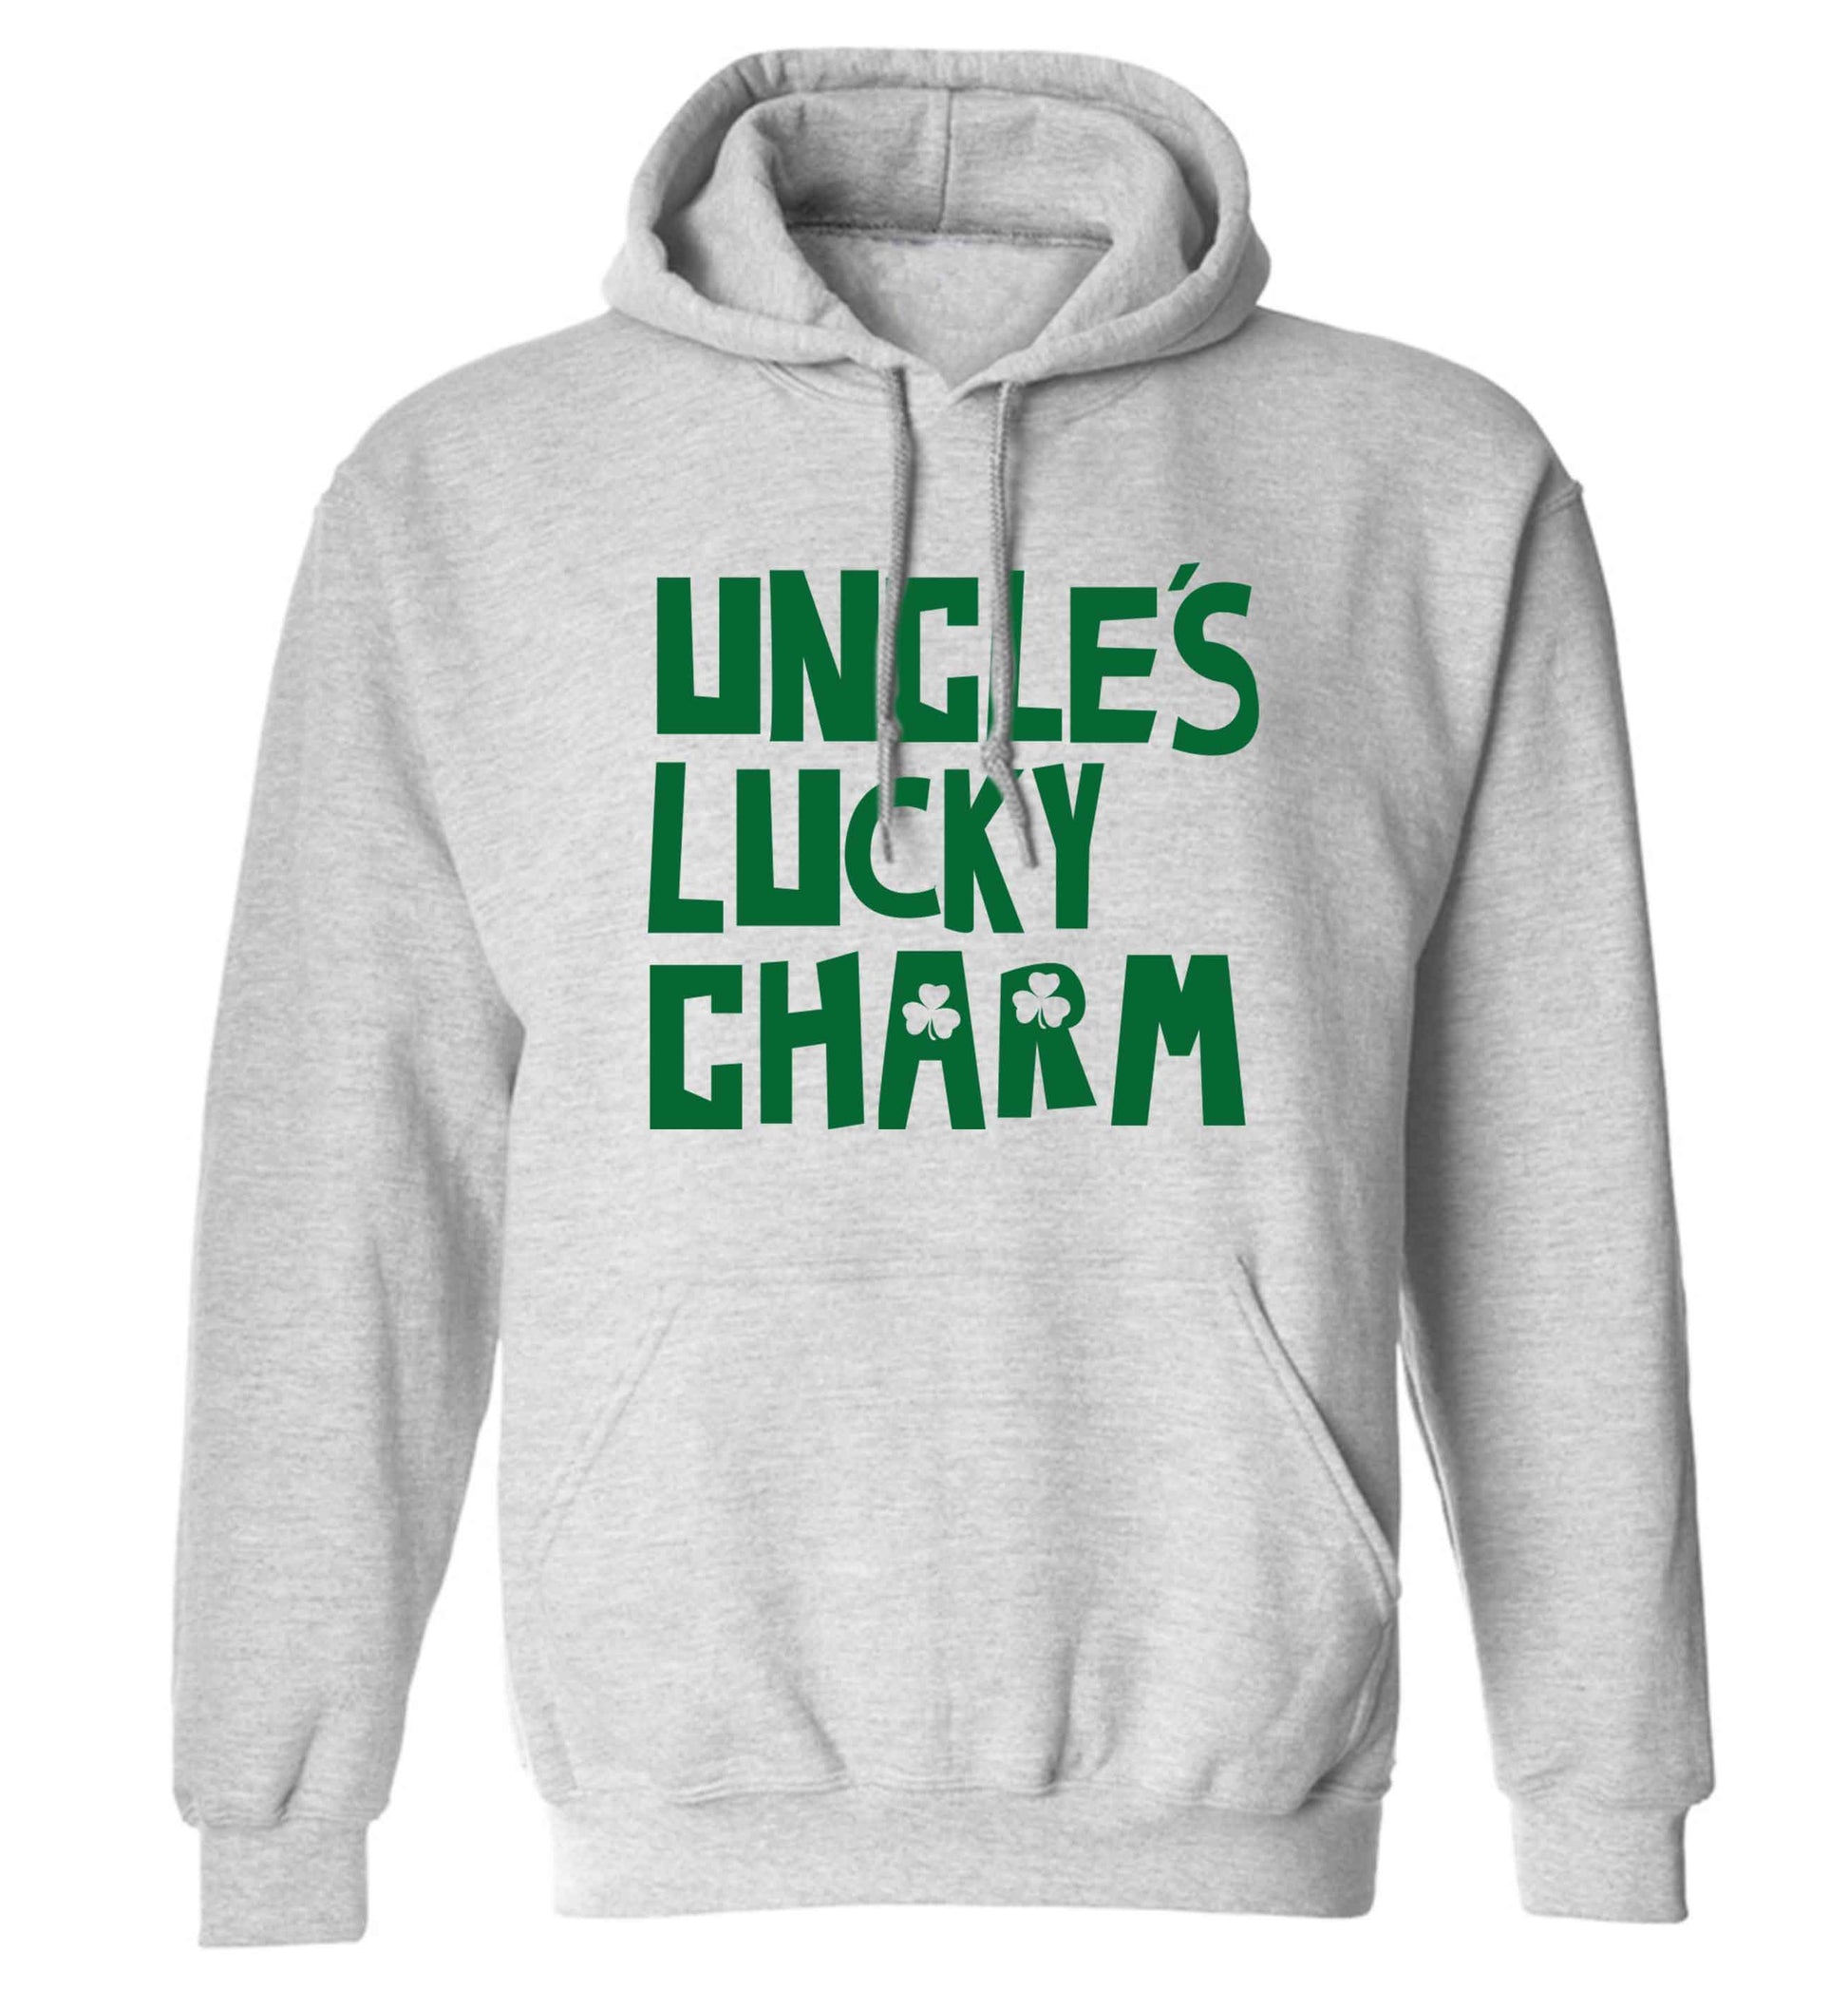 Uncles lucky charm adults unisex grey hoodie 2XL